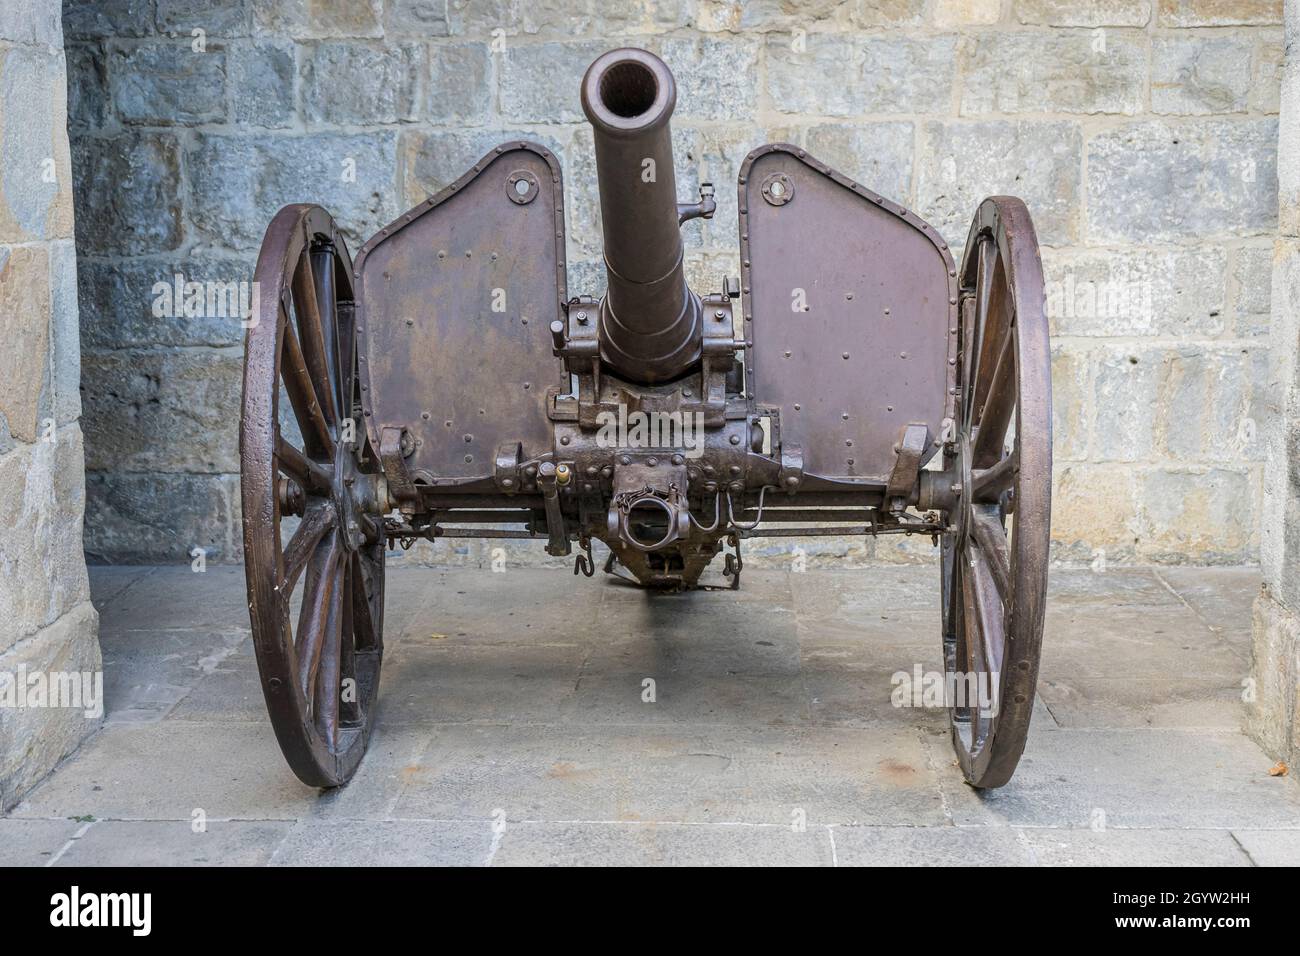 Fortification,  Military cannon in the fortified citadel of Pamplona, Navarra Spain. Piece of artillery from the 19th century made of steel and used Stock Photo